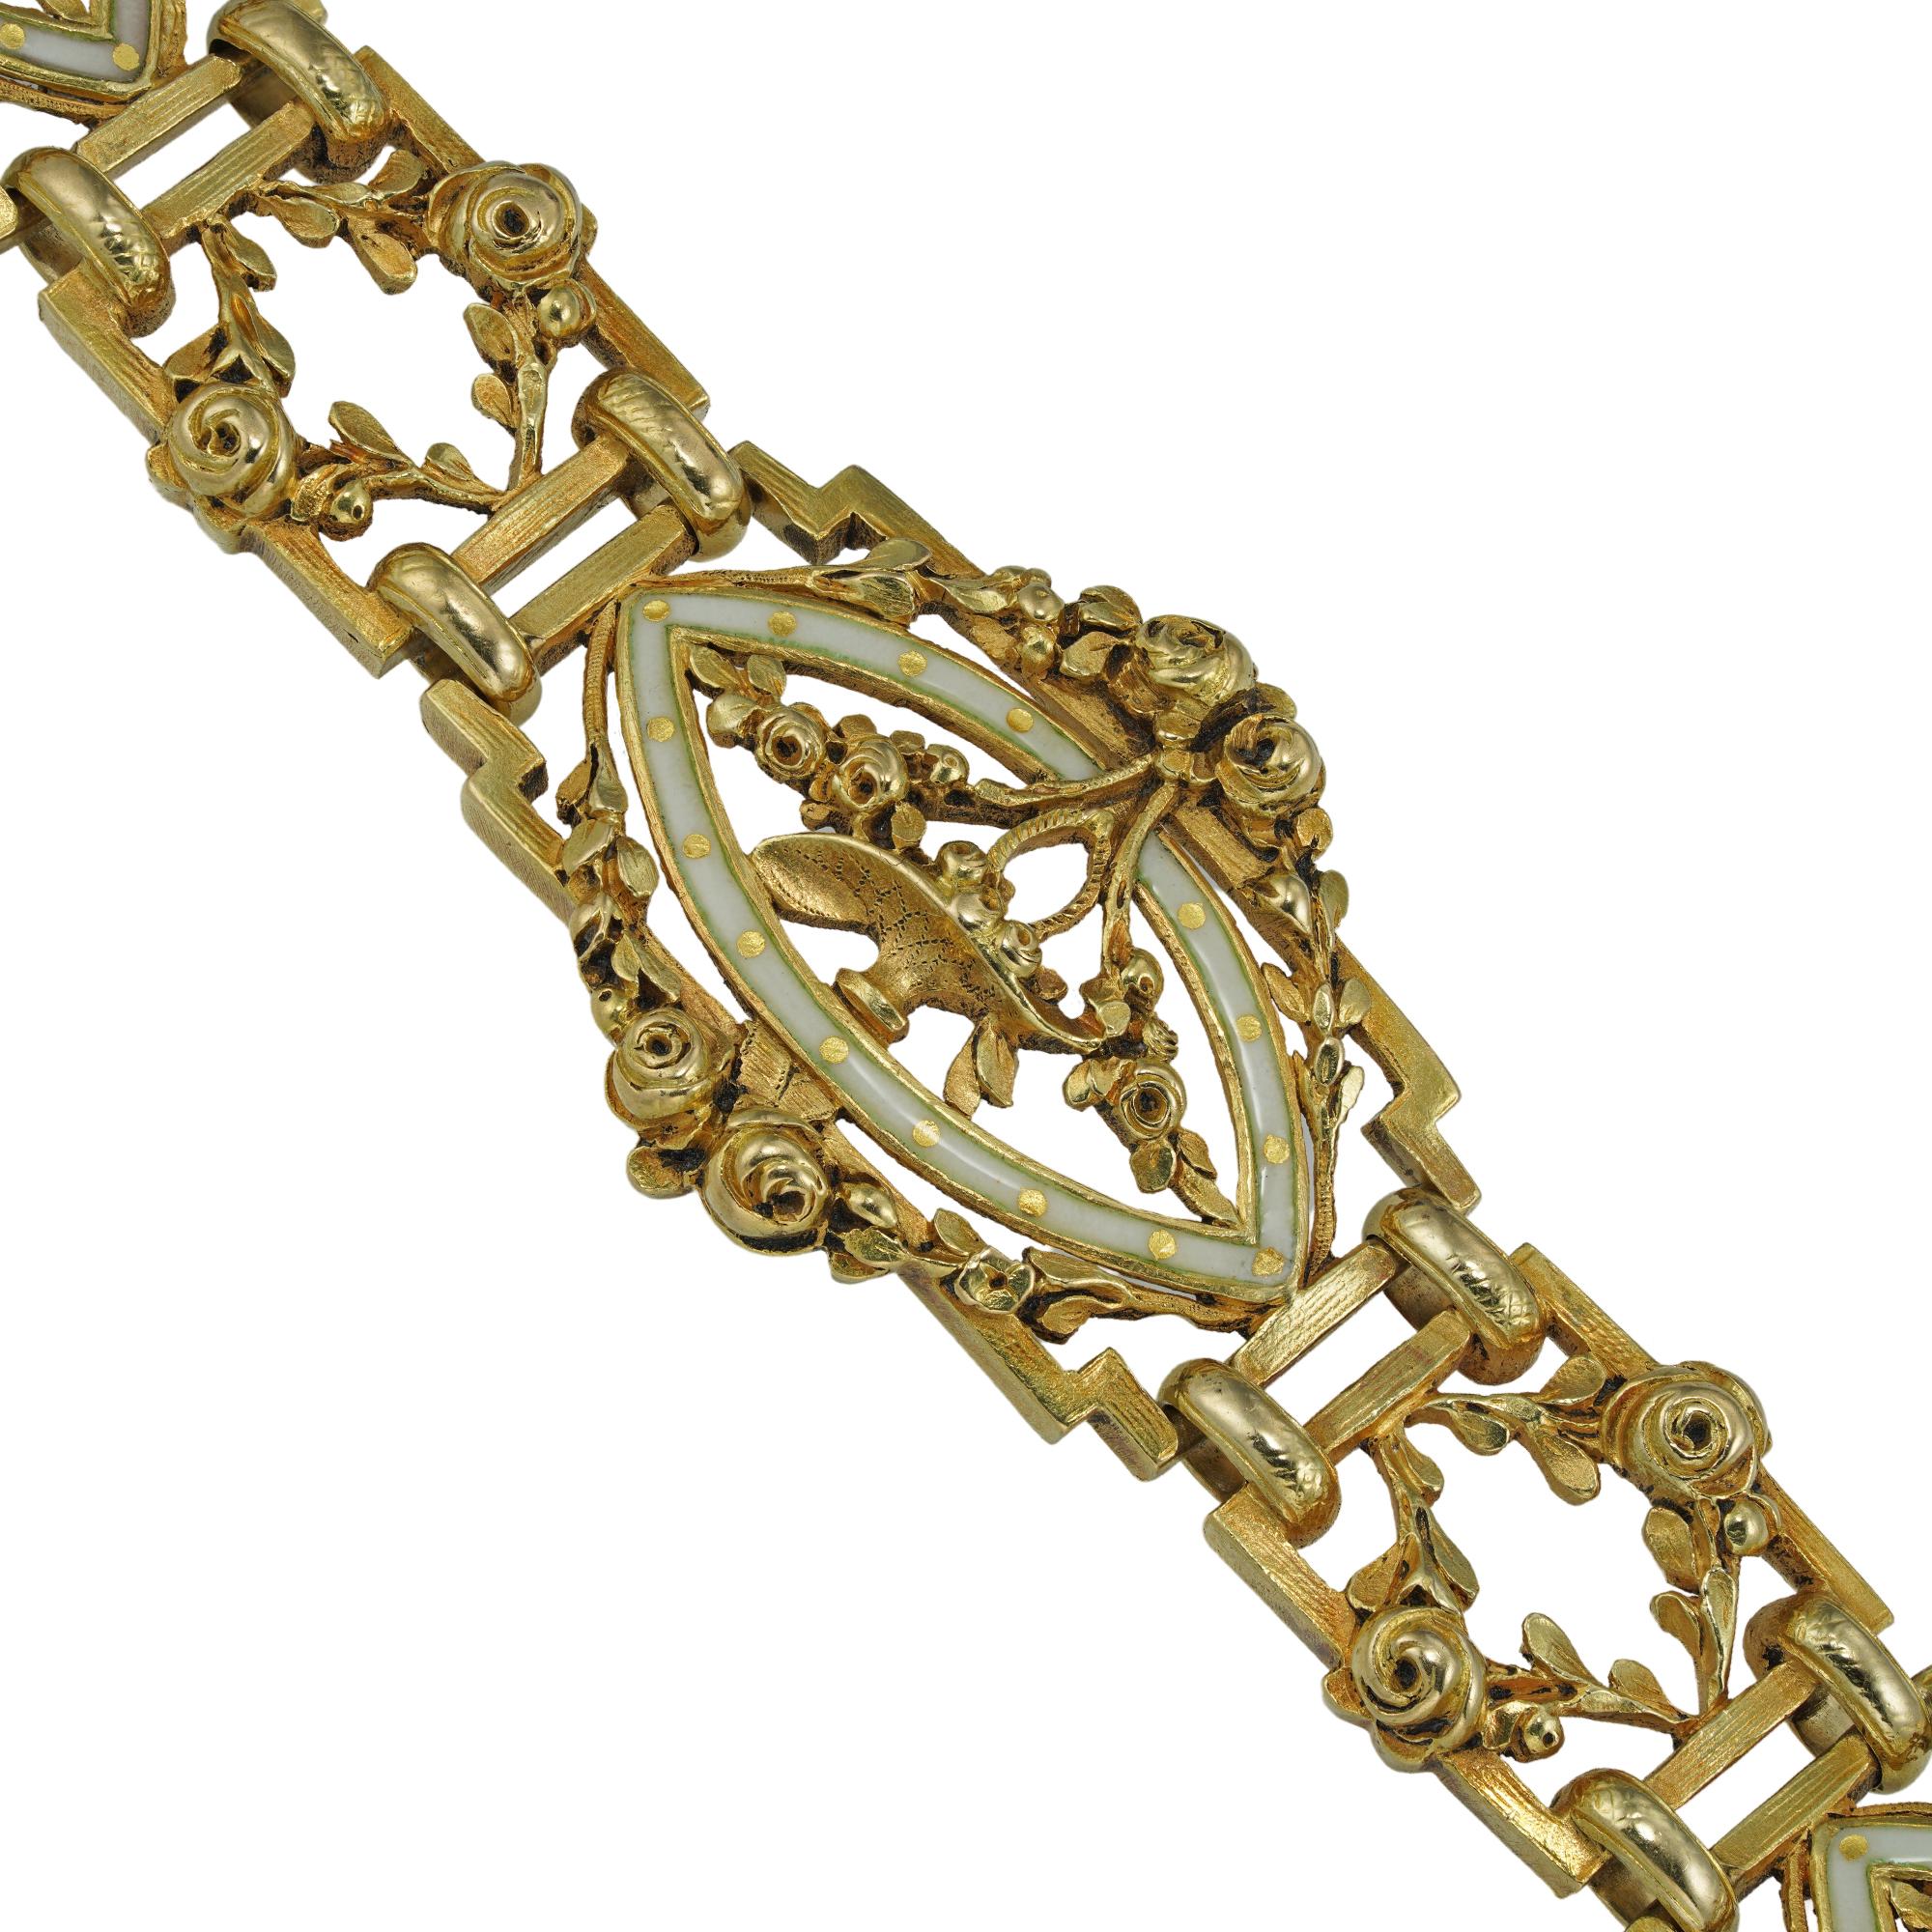 A Belle Époque gold and enamel bracelet, consisting of five cartouche-shaped links of openwork design, each depicting to a basket of flowers surrounded by an ivory colour enamel frame with floral garland-style decorations, connected with five